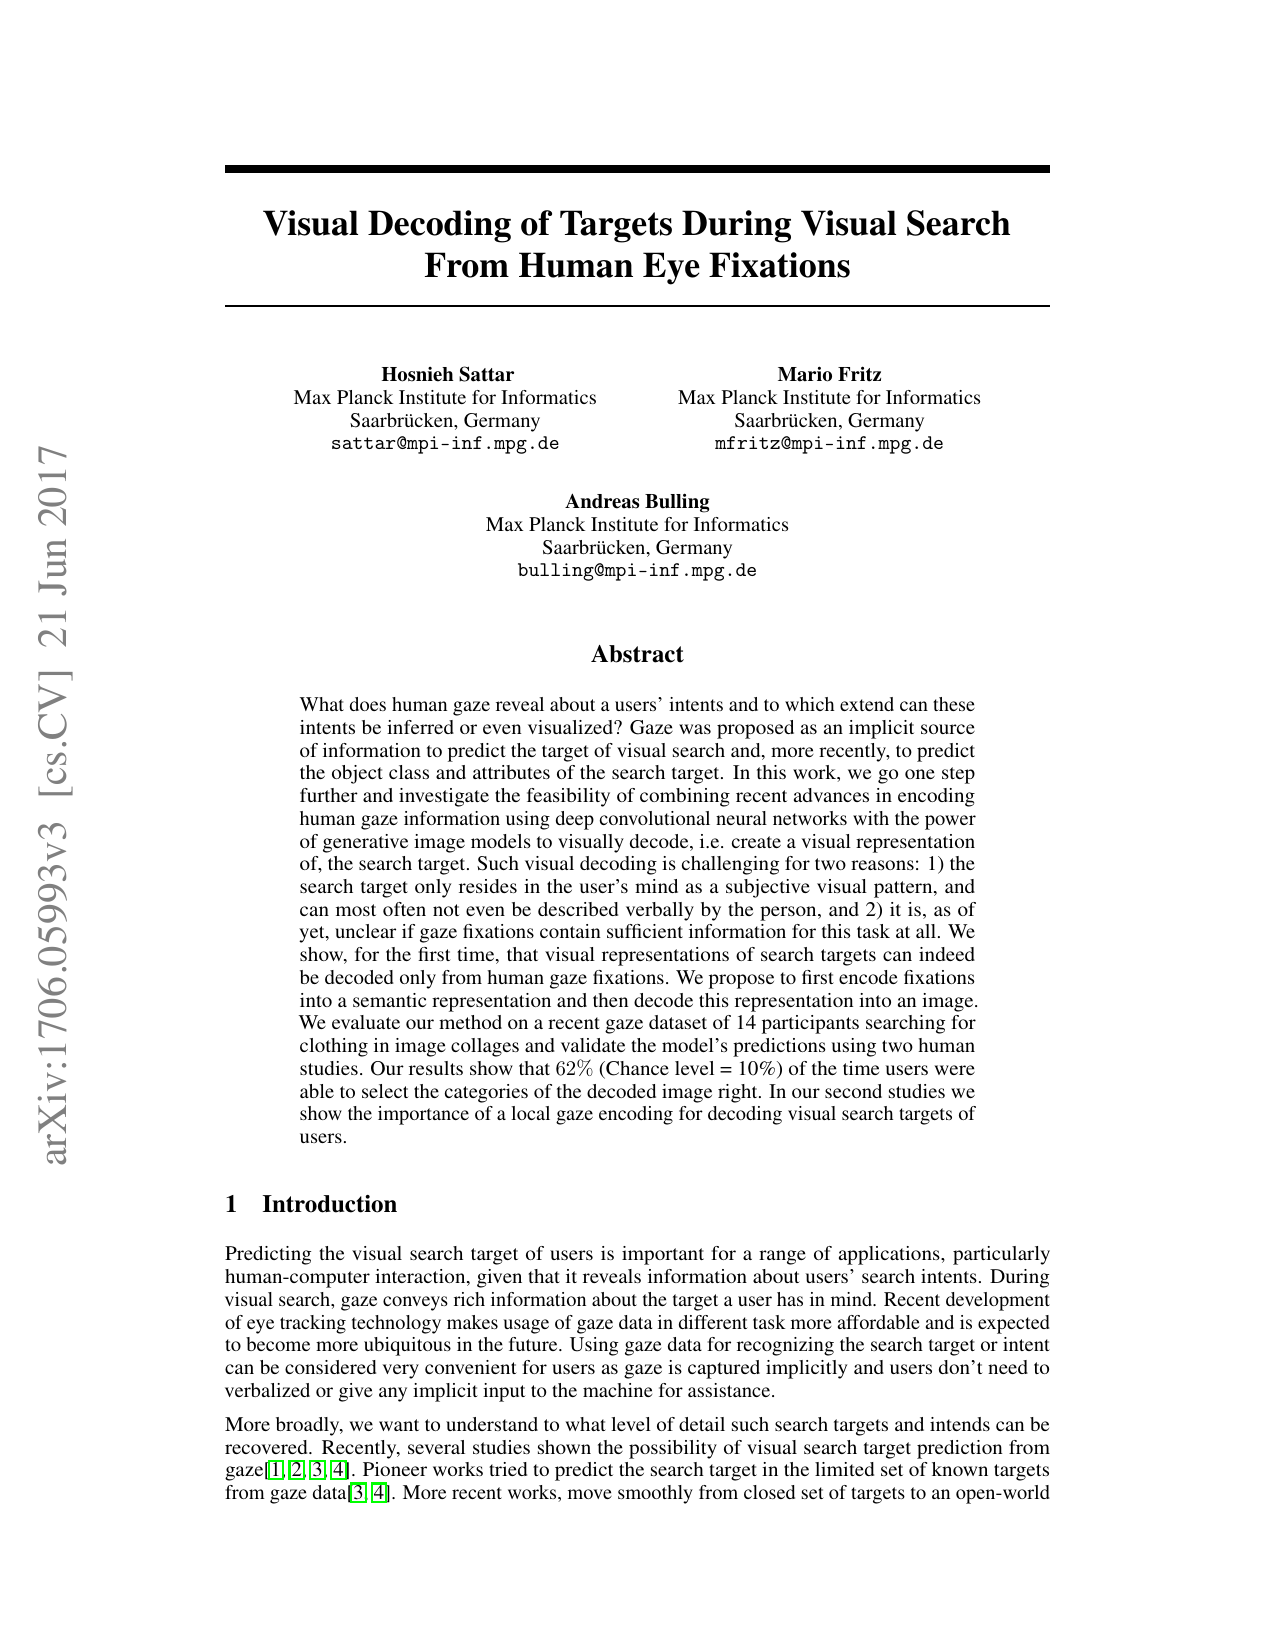 Visual Decoding of Targets During Visual Search From Human Eye Fixations